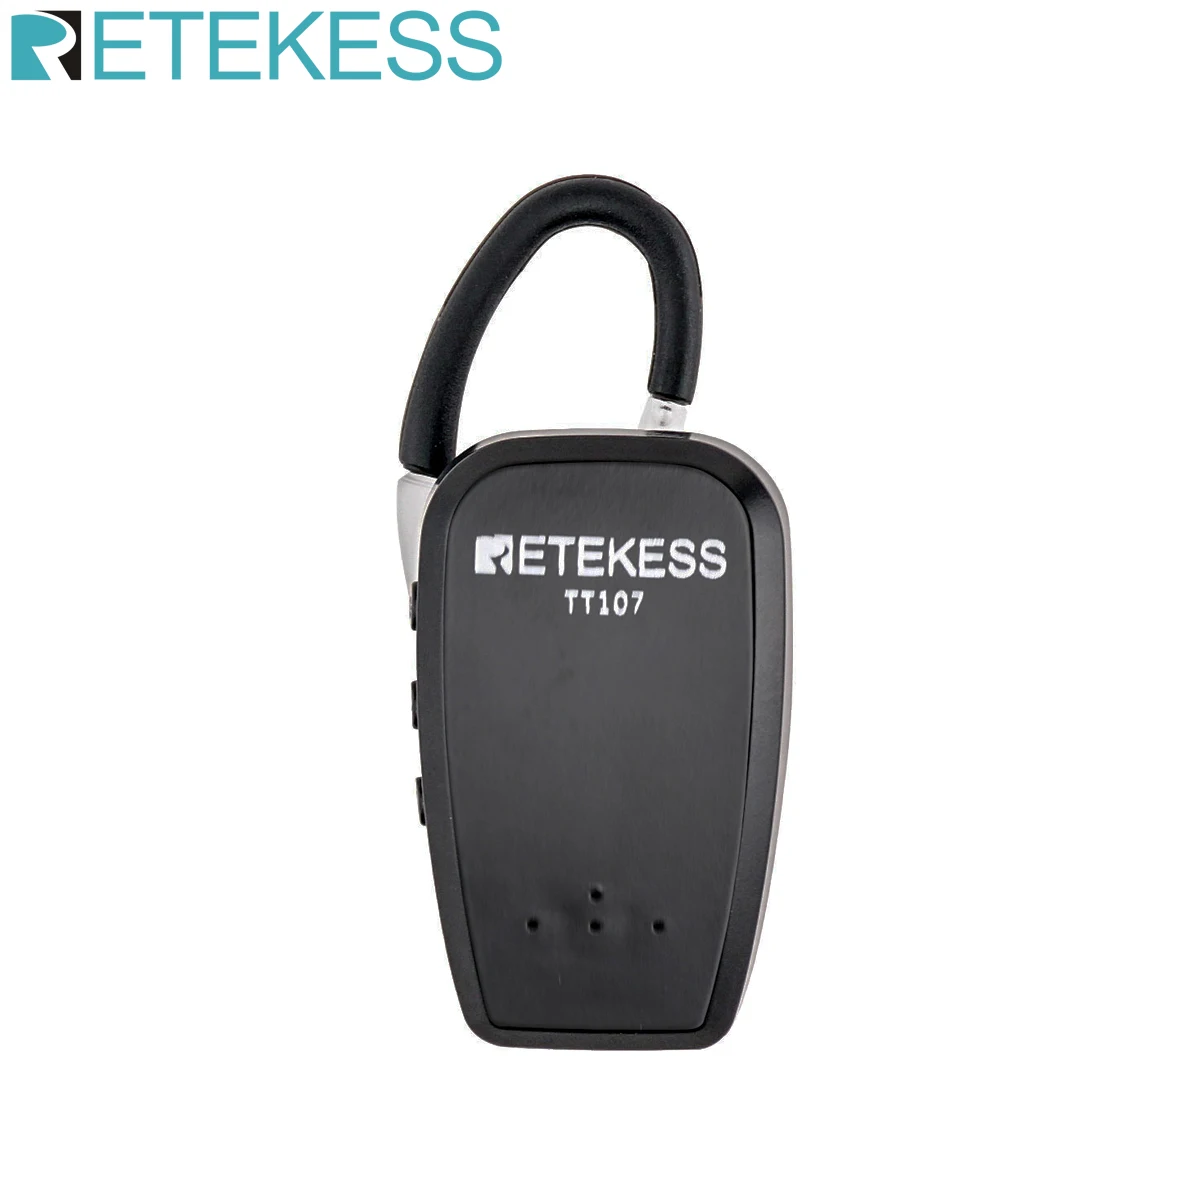 RETEKESS TT107 UHF Professional Ears Hanging Wireless Receiver for wireless tour guide system for church meeting tour guide etc